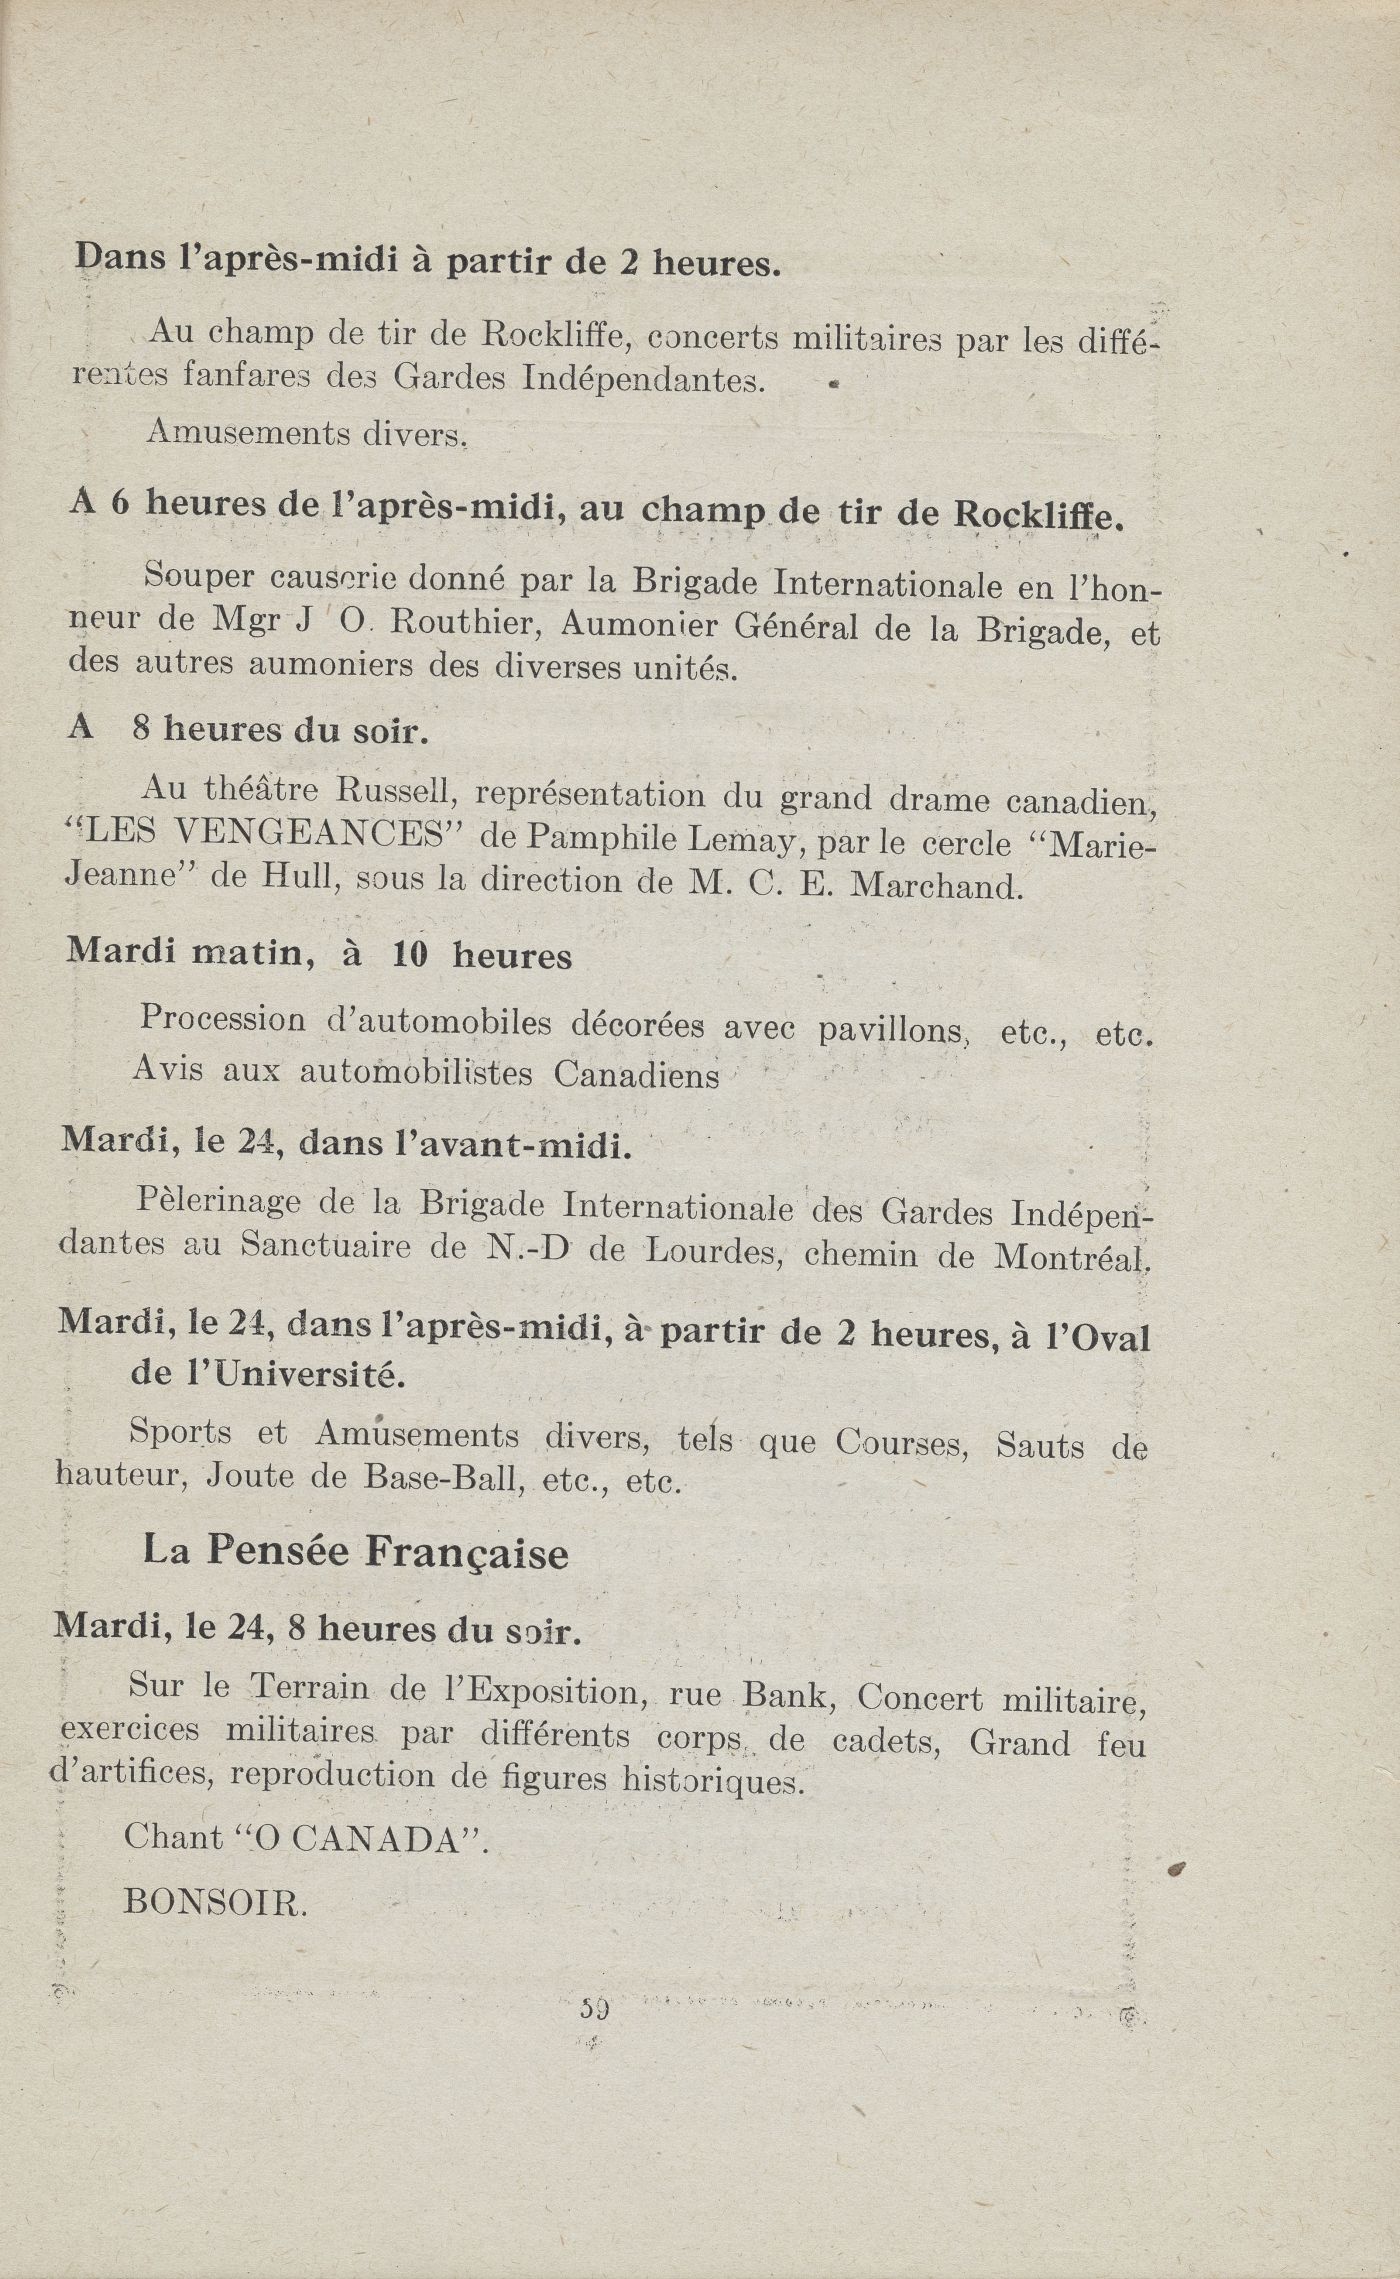 Text printed in French. The title page, printed on blue card stock, includes the name, location and rationale of the rally in large print. A beaver, symbol of the Société Saint-Jean-Baptiste, takes up the first third of the page. The inside of the program contains a few pages detailing events, with information organized according to the date, time and content of the activities.